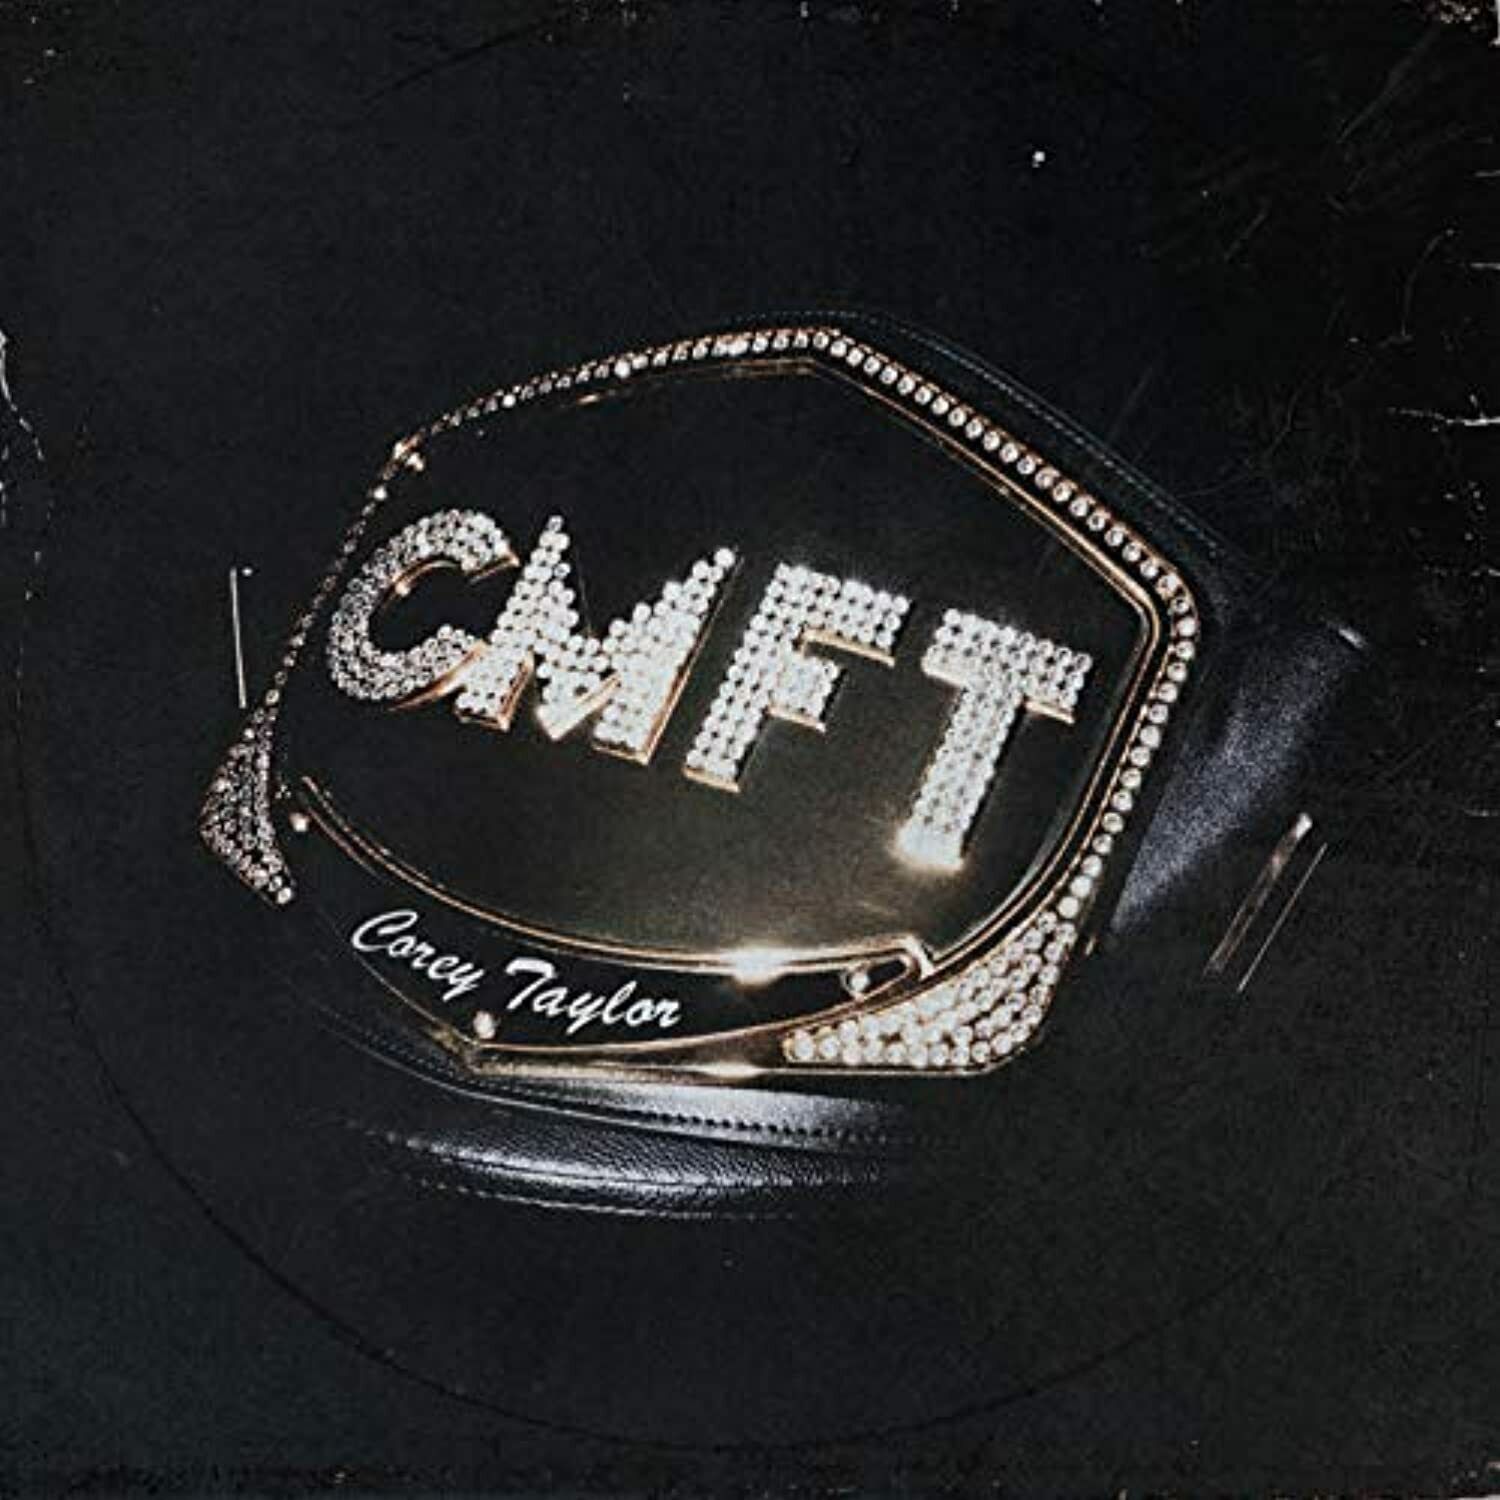 CMFT by Corey Taylor (CD, 2020, Roadrunner Records) NEW